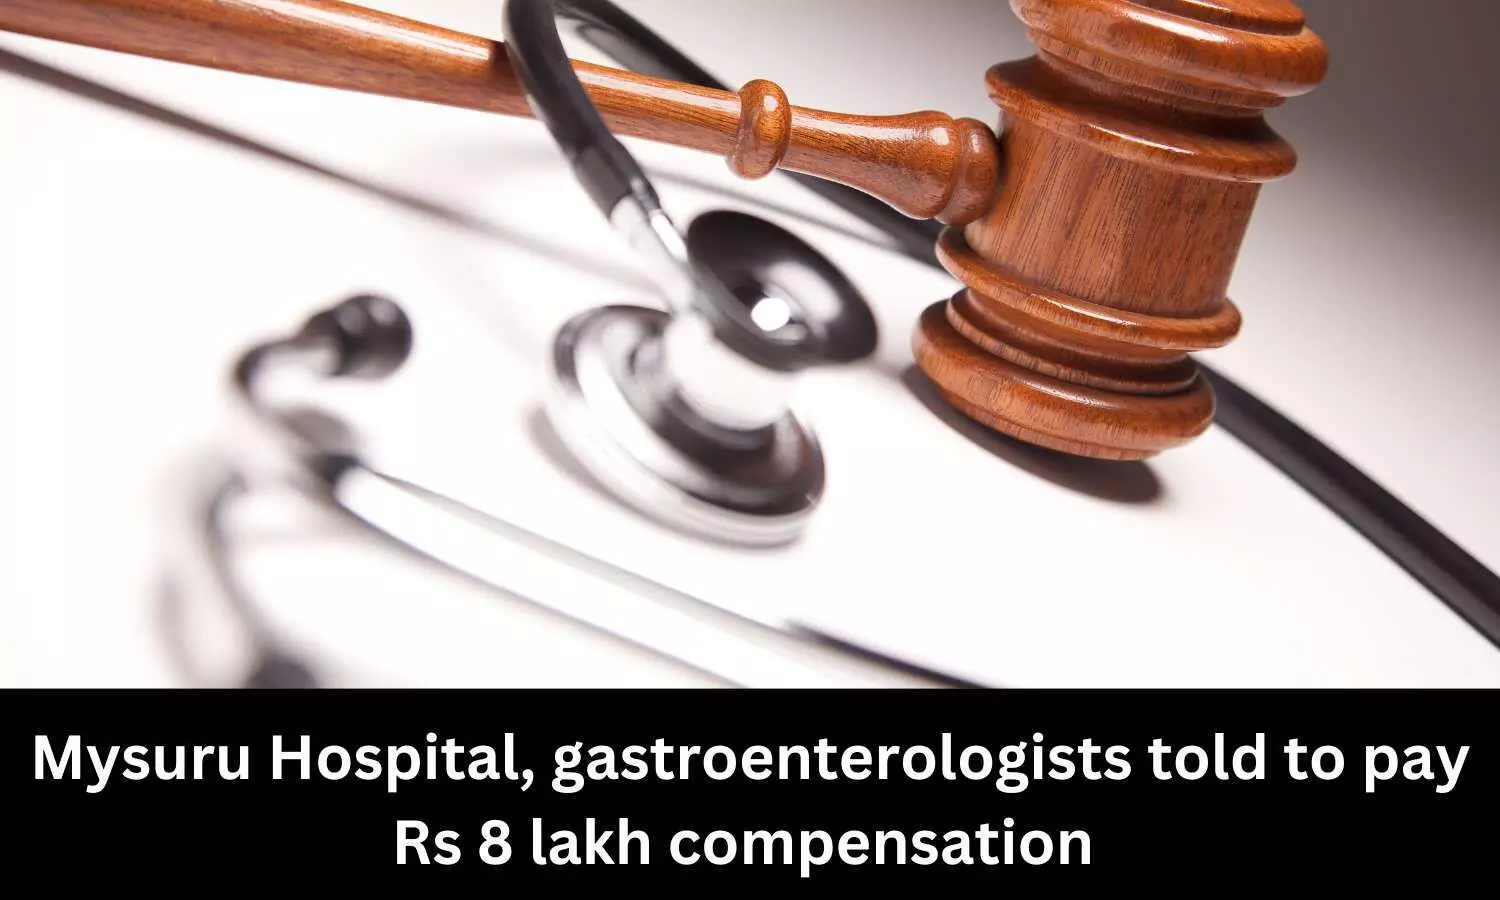 Non-insertion of Ileostomy bag after surgery: Mysuru Hospital, gastroenterologists told to pay Rs 8 lakh compensation